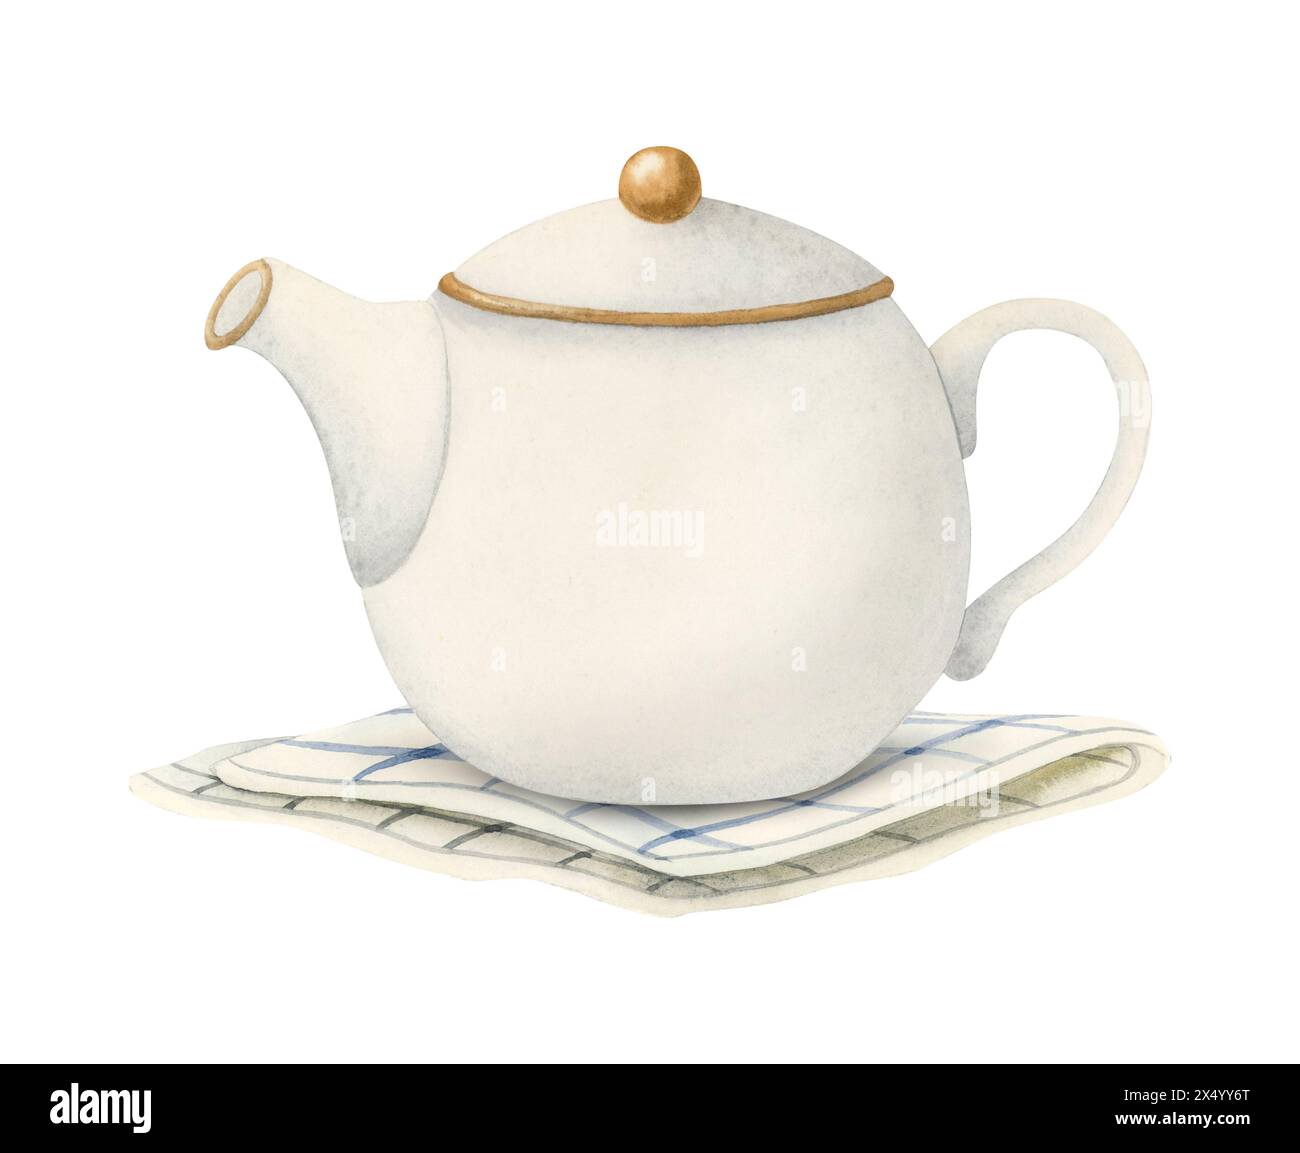 White ceramic teapot on striped table napkin or towel watercolor illustration for cafe menu, herbal tea packages Stock Photo